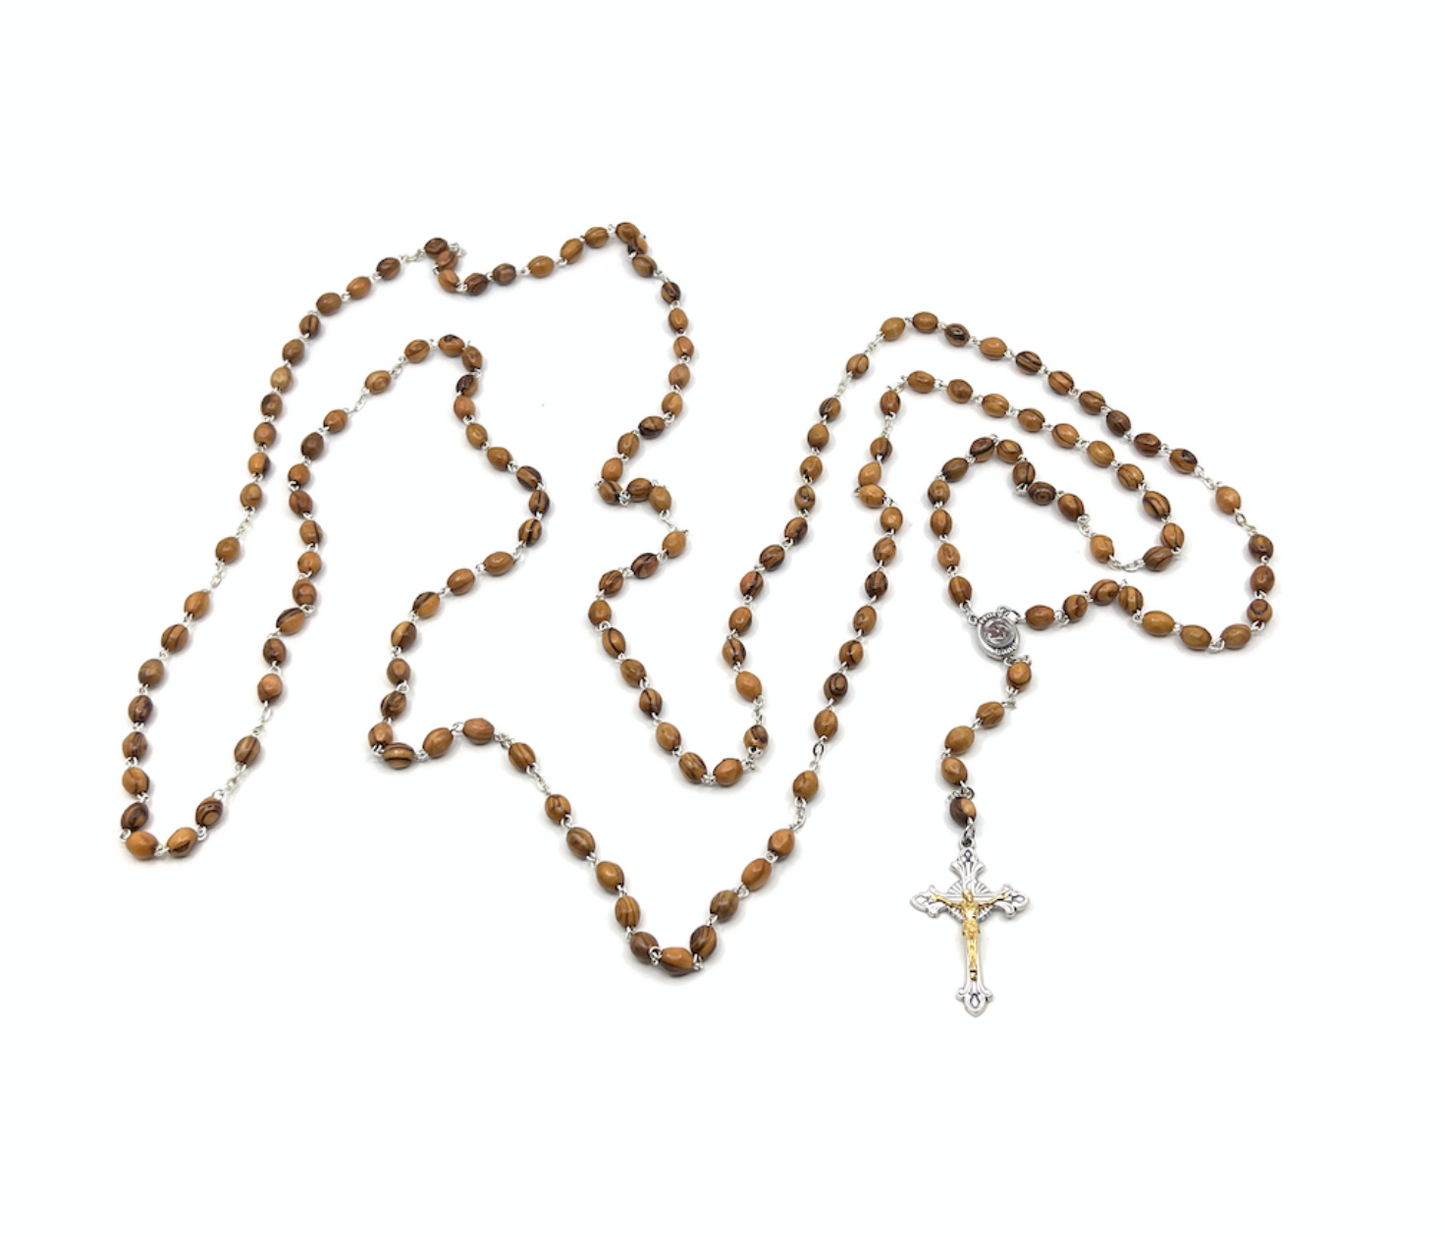 15 decade Rosary Olive Wood Beads fifteen with Golden Corpus Soil from Holy Land